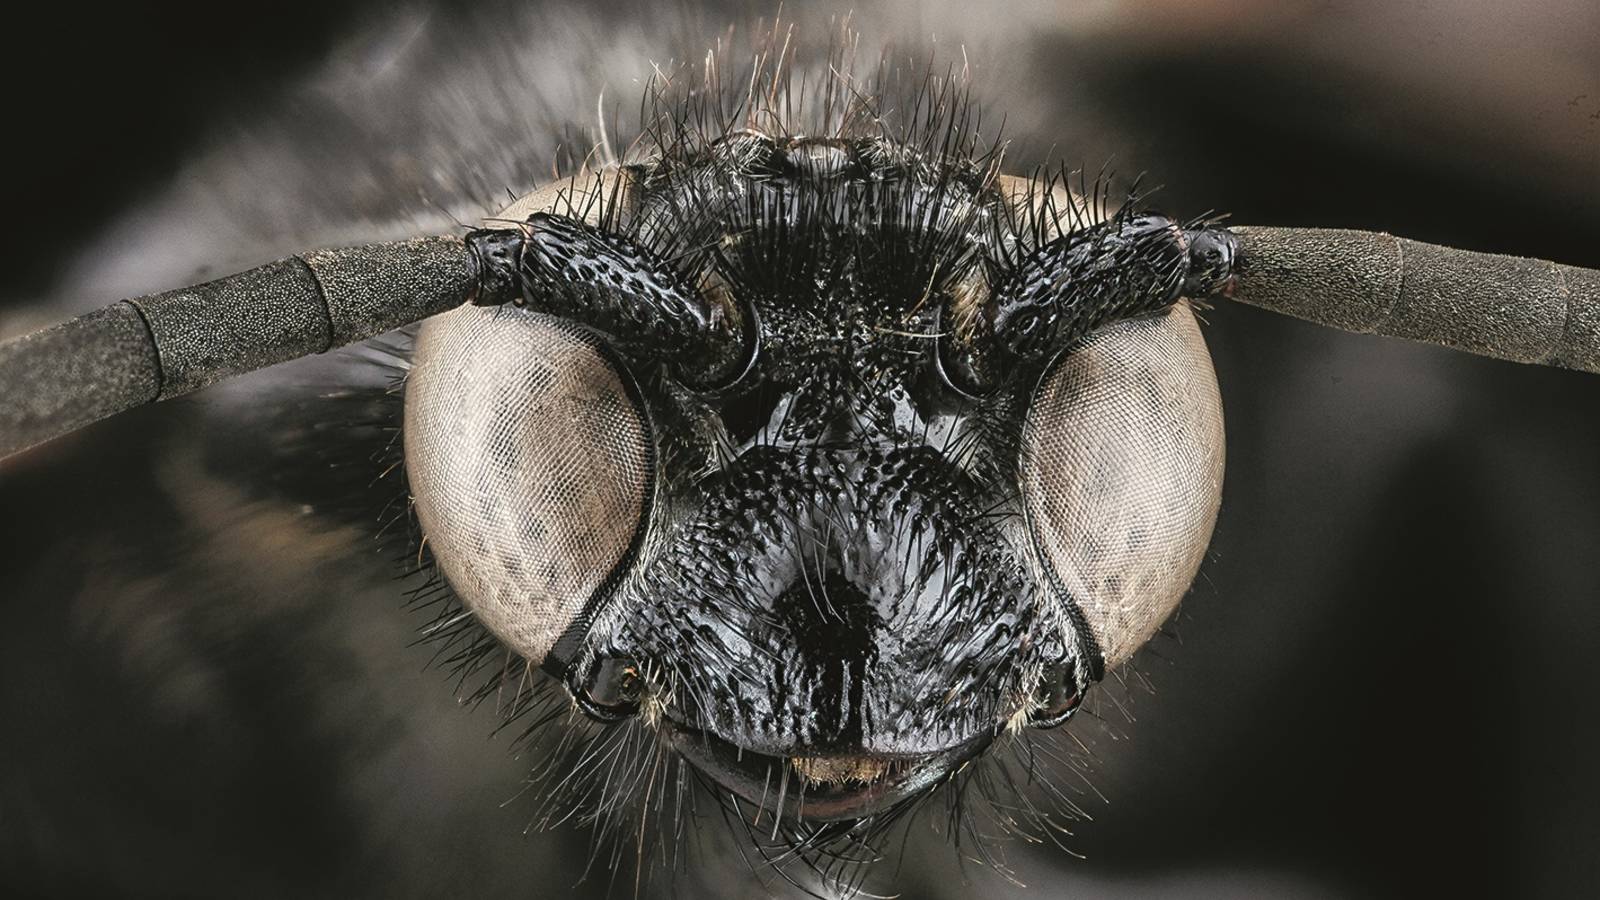 <h3 style="text-align: center; padding: 50px;"><span class="text-Intro-style"><em>Scolia bicincta</em> (wasp), Cape Cod National Seashore, Massachusetts. © SAM DROEGE/USGS BEE INVENTORY AND MONITORING LAB</span></h3>